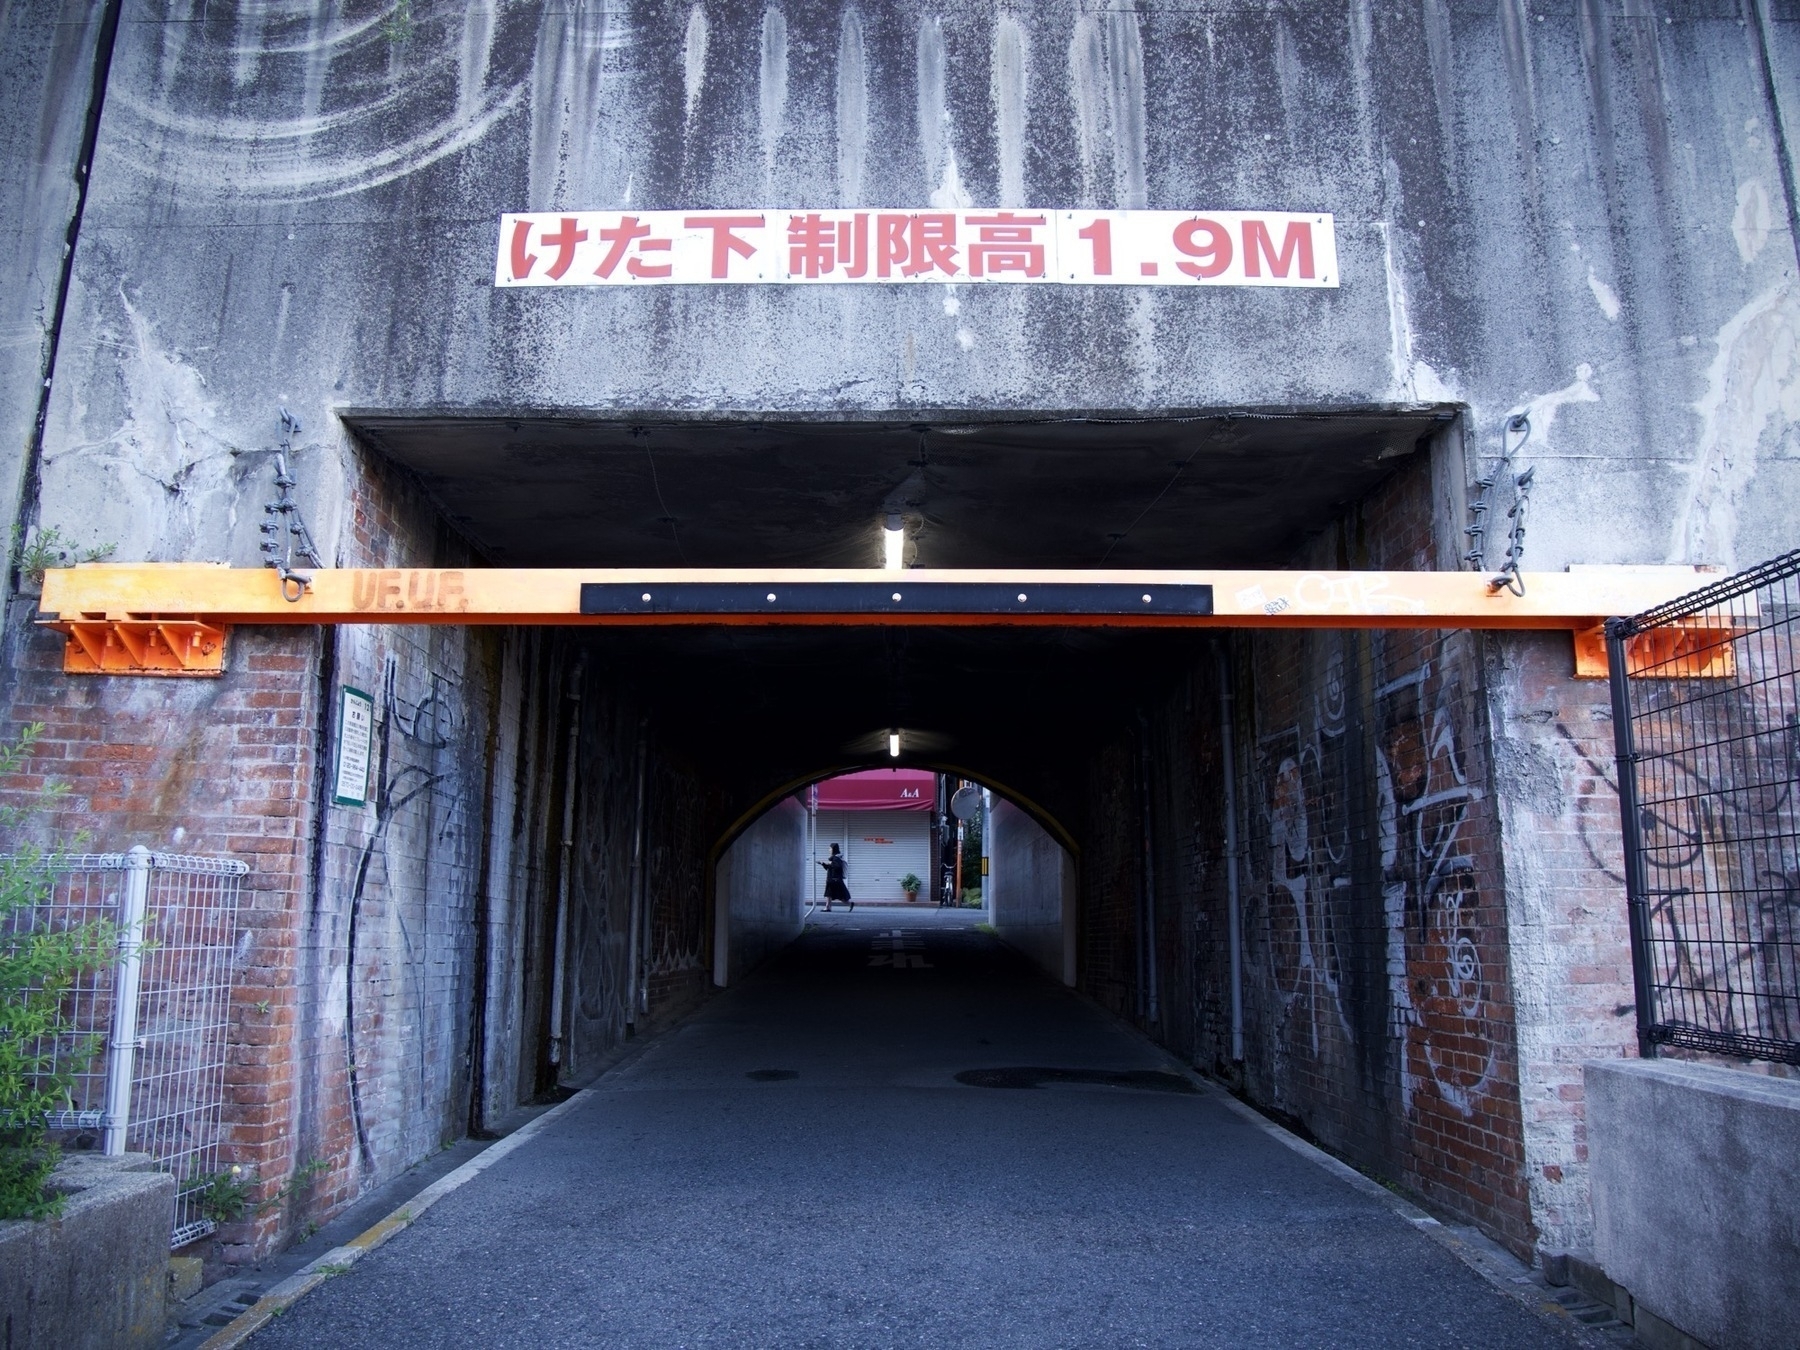 dark underpass under railway tracks during the day. The underpass is initally squared off, but then partway there is an arch from a previous period. On the far side a woman walks to the left. Above is a sign that says けた下制限高1.9M indicating the max height is 1.9m